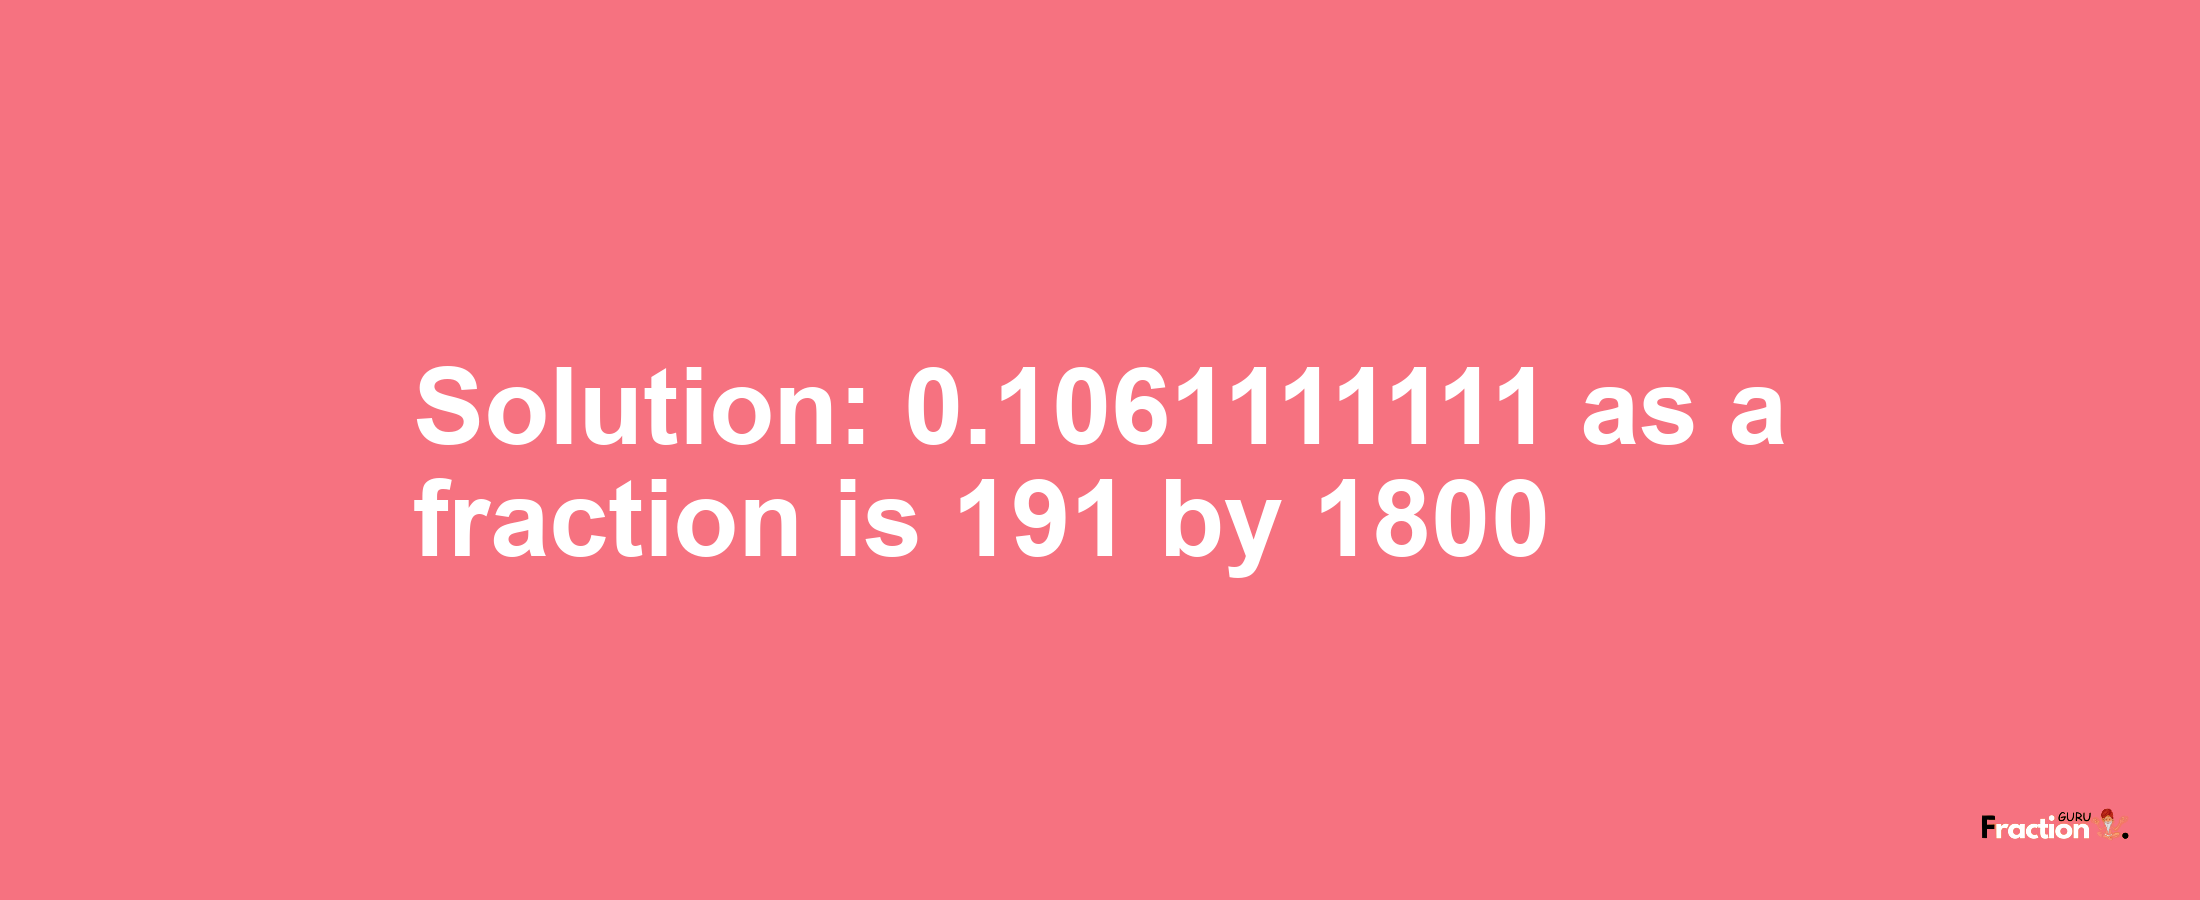 Solution:0.1061111111 as a fraction is 191/1800